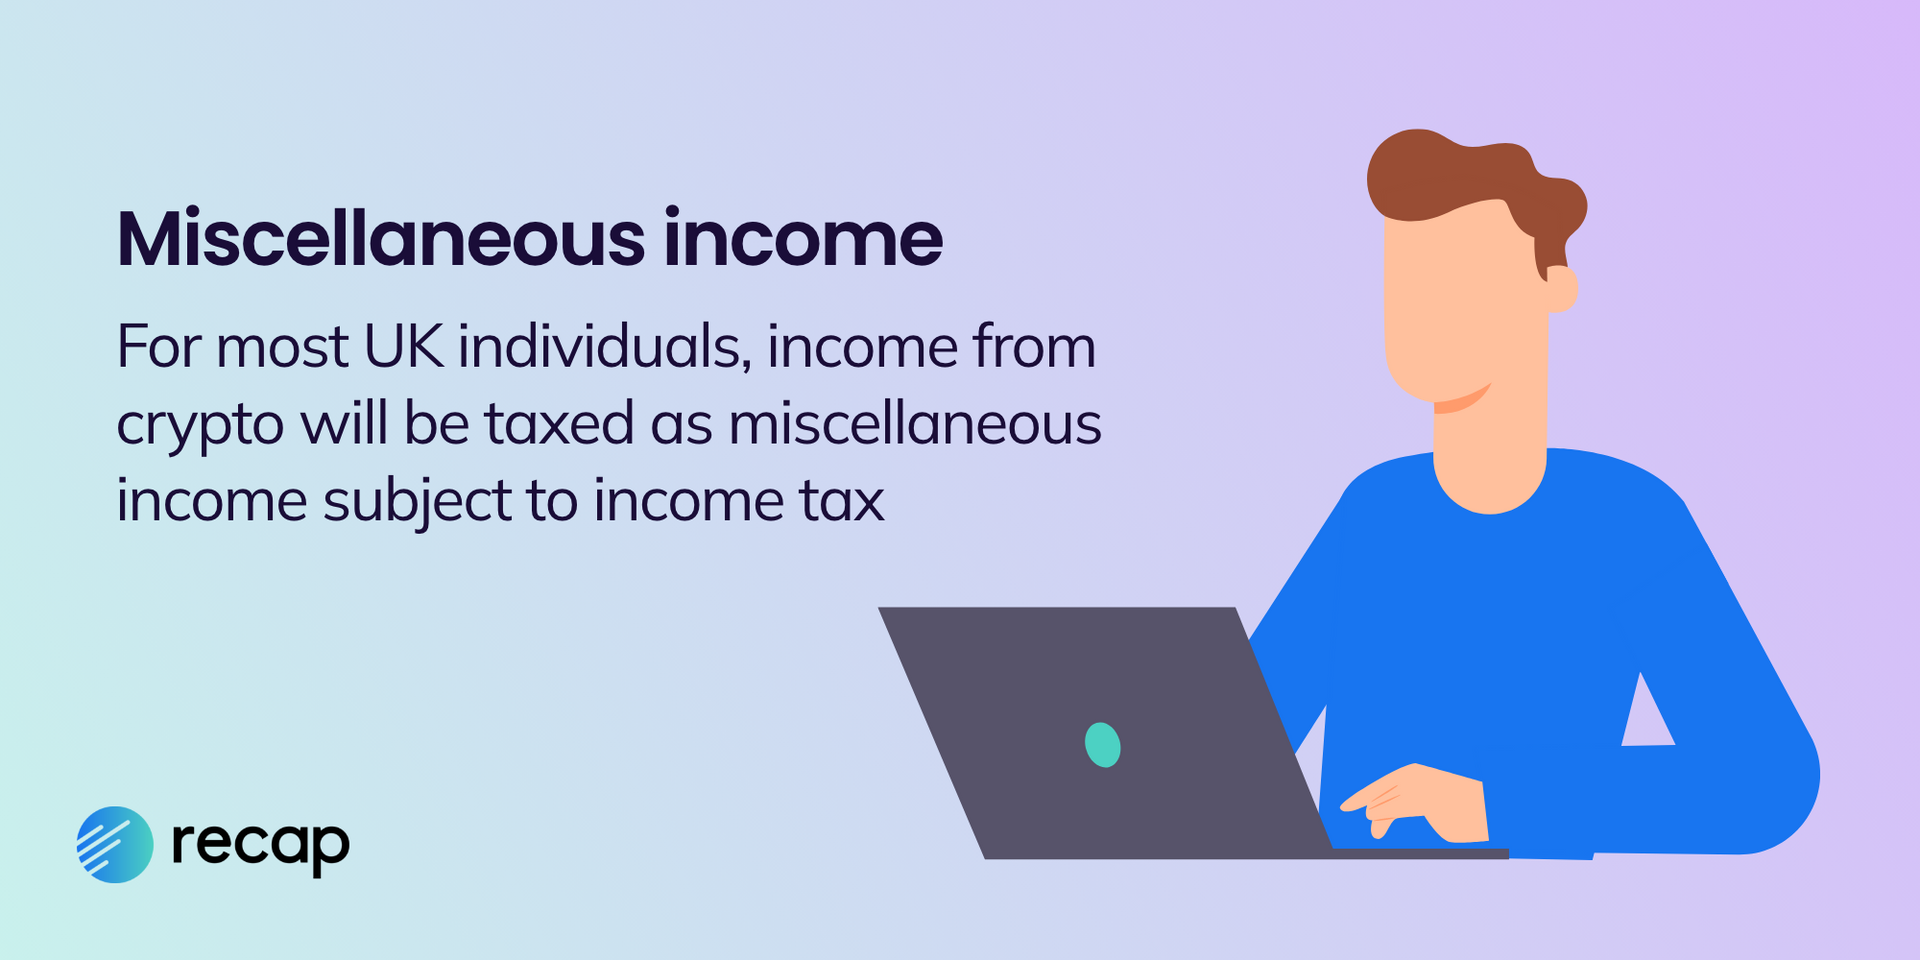 A graphic stating that "for most UK individuals, income from crypto will be taxed as miscellaneous income